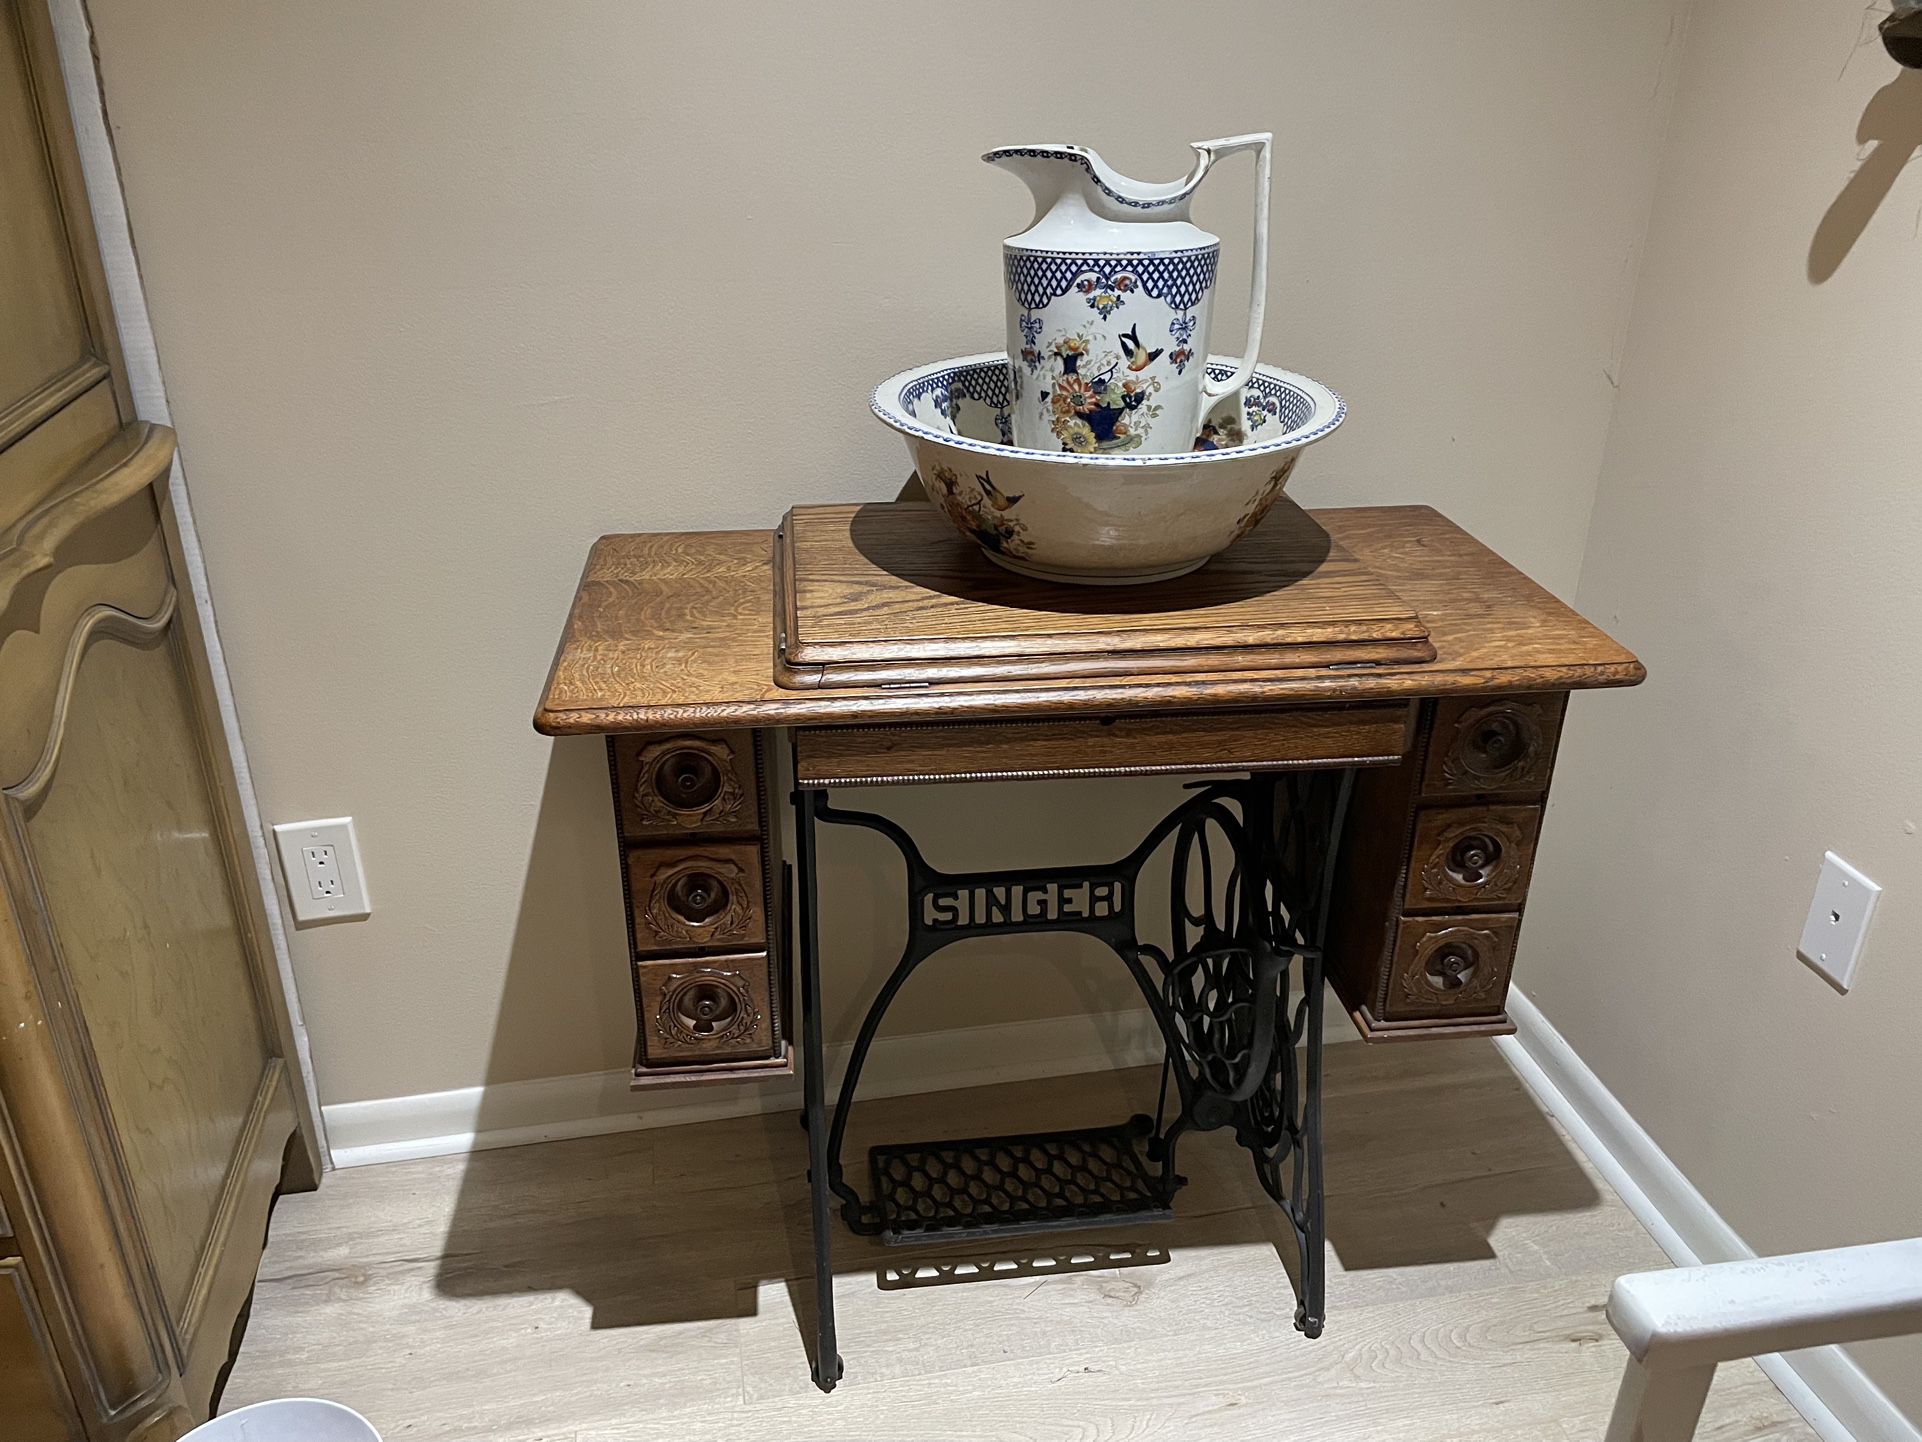 Antique Sewing Table & Pitcher / Bowl